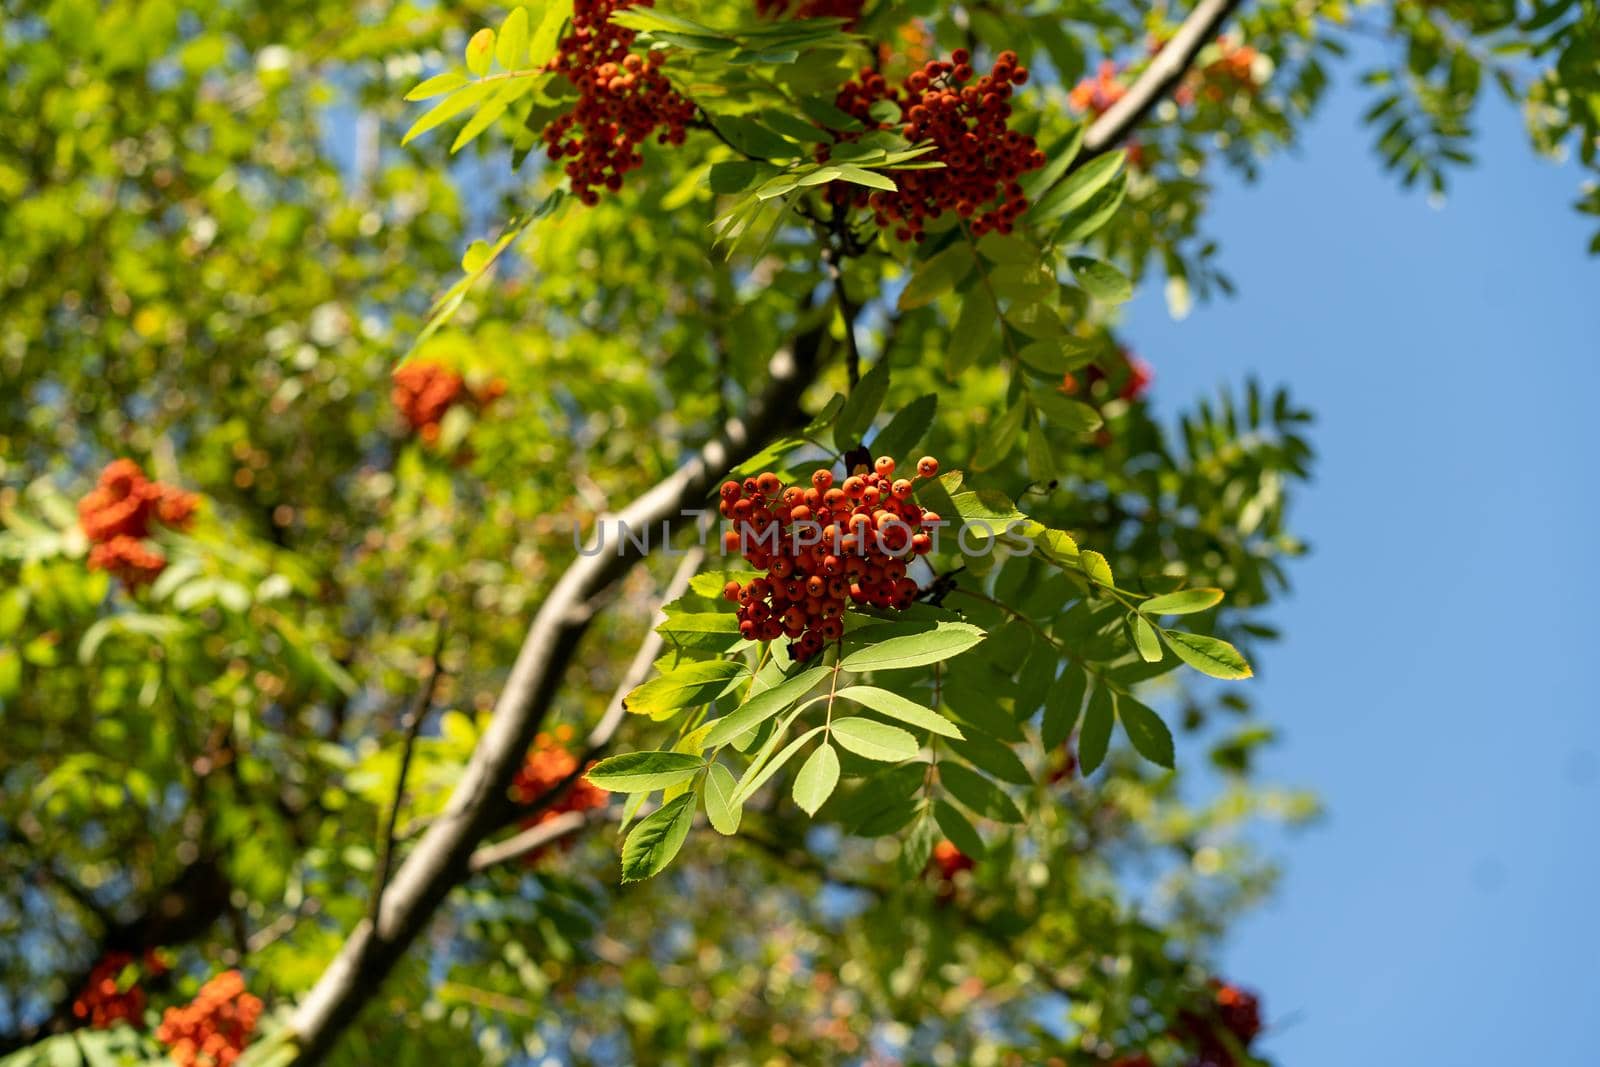 Mountain ash branches with red fruits against the blue sky.